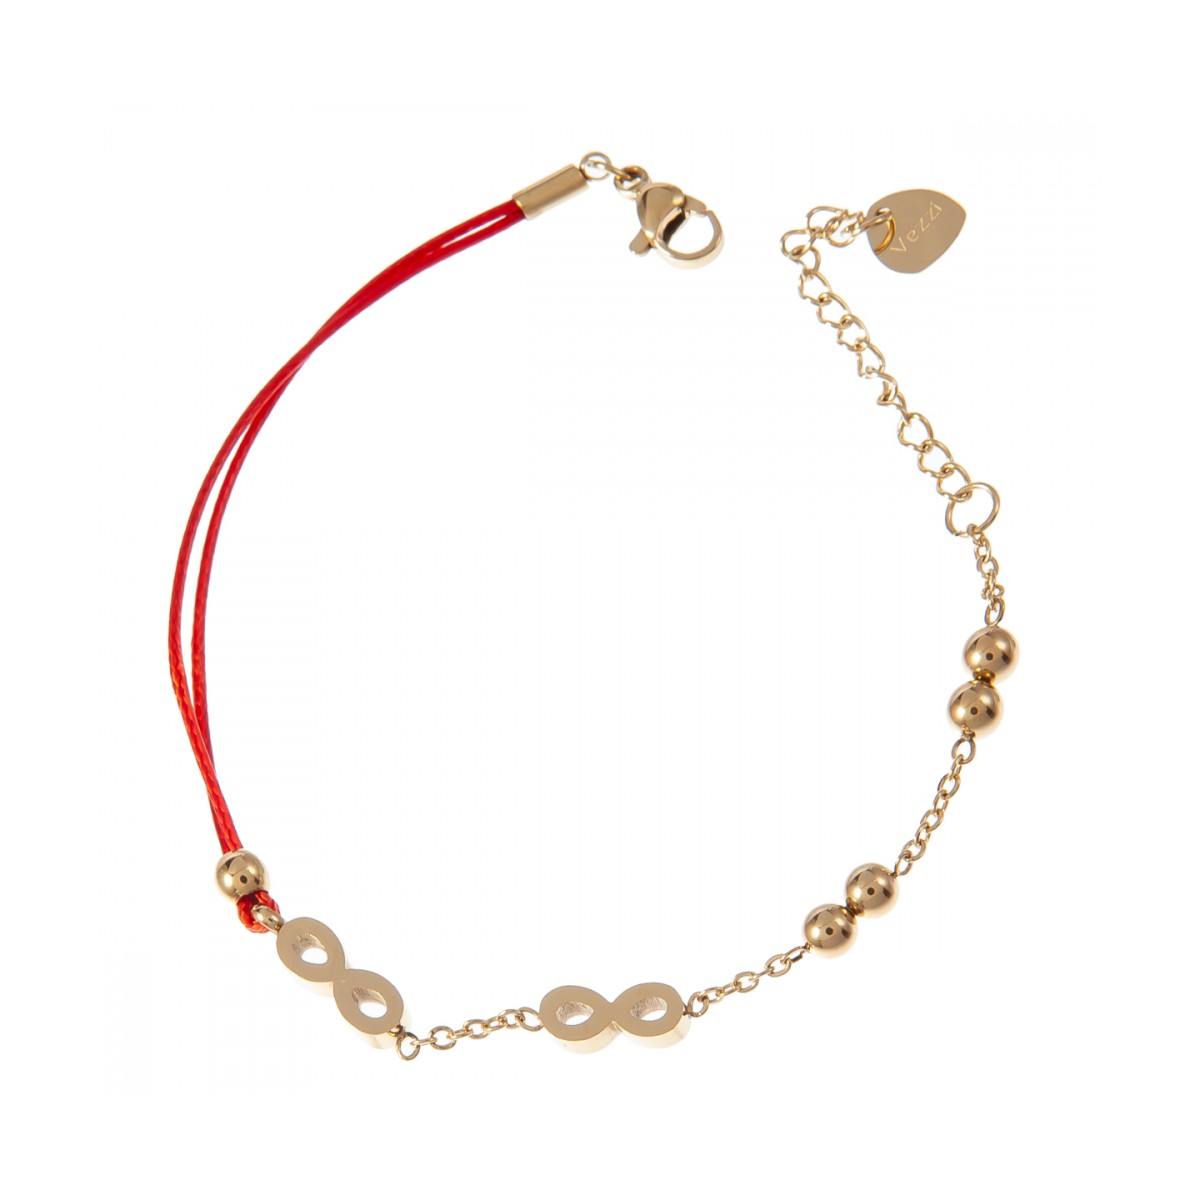 Gold Plated Star or Infinity Chain Bracelet with red thread 1